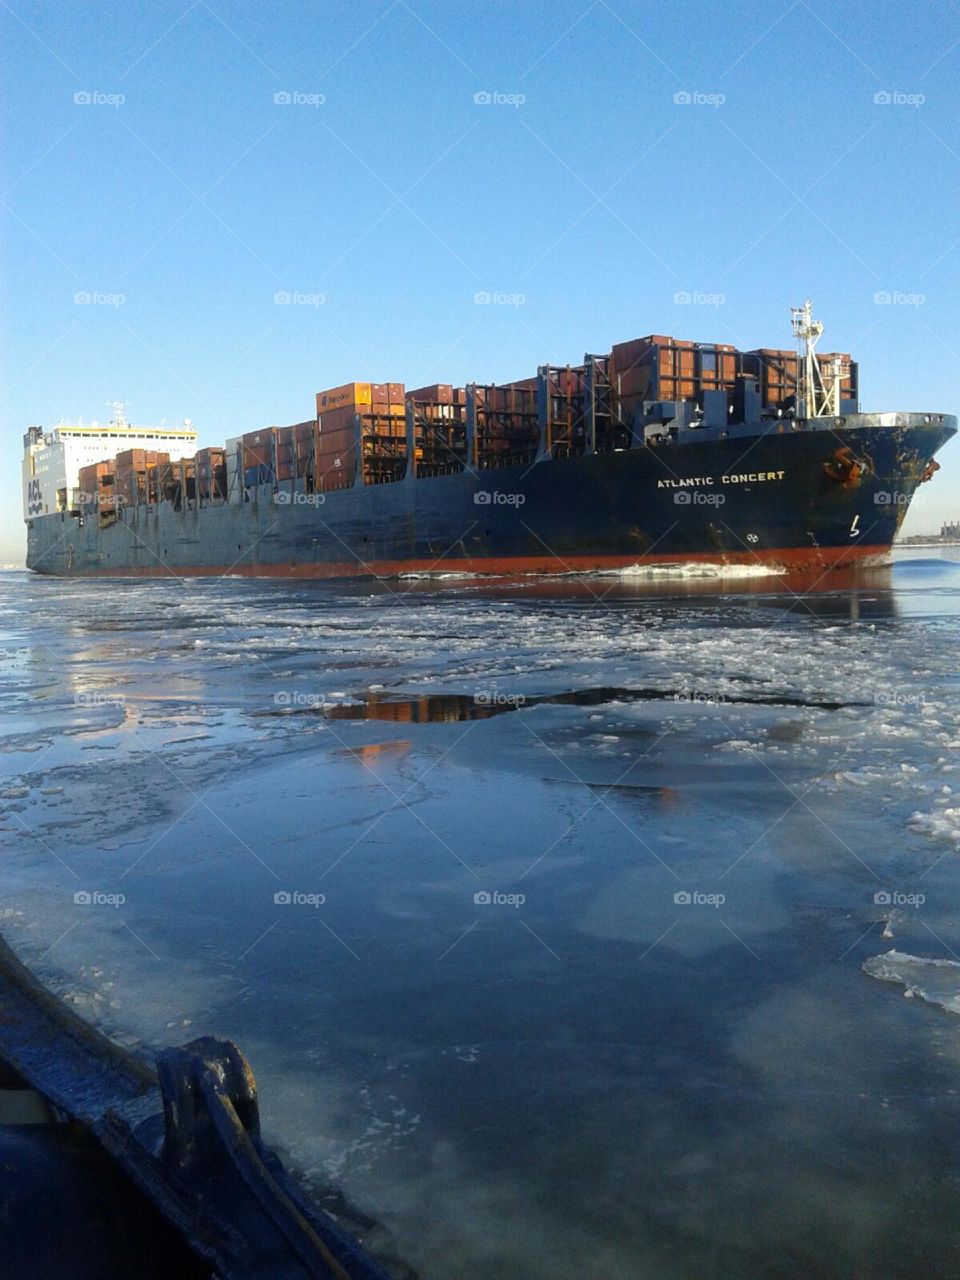 ACL Container Ship Atlantic Concert